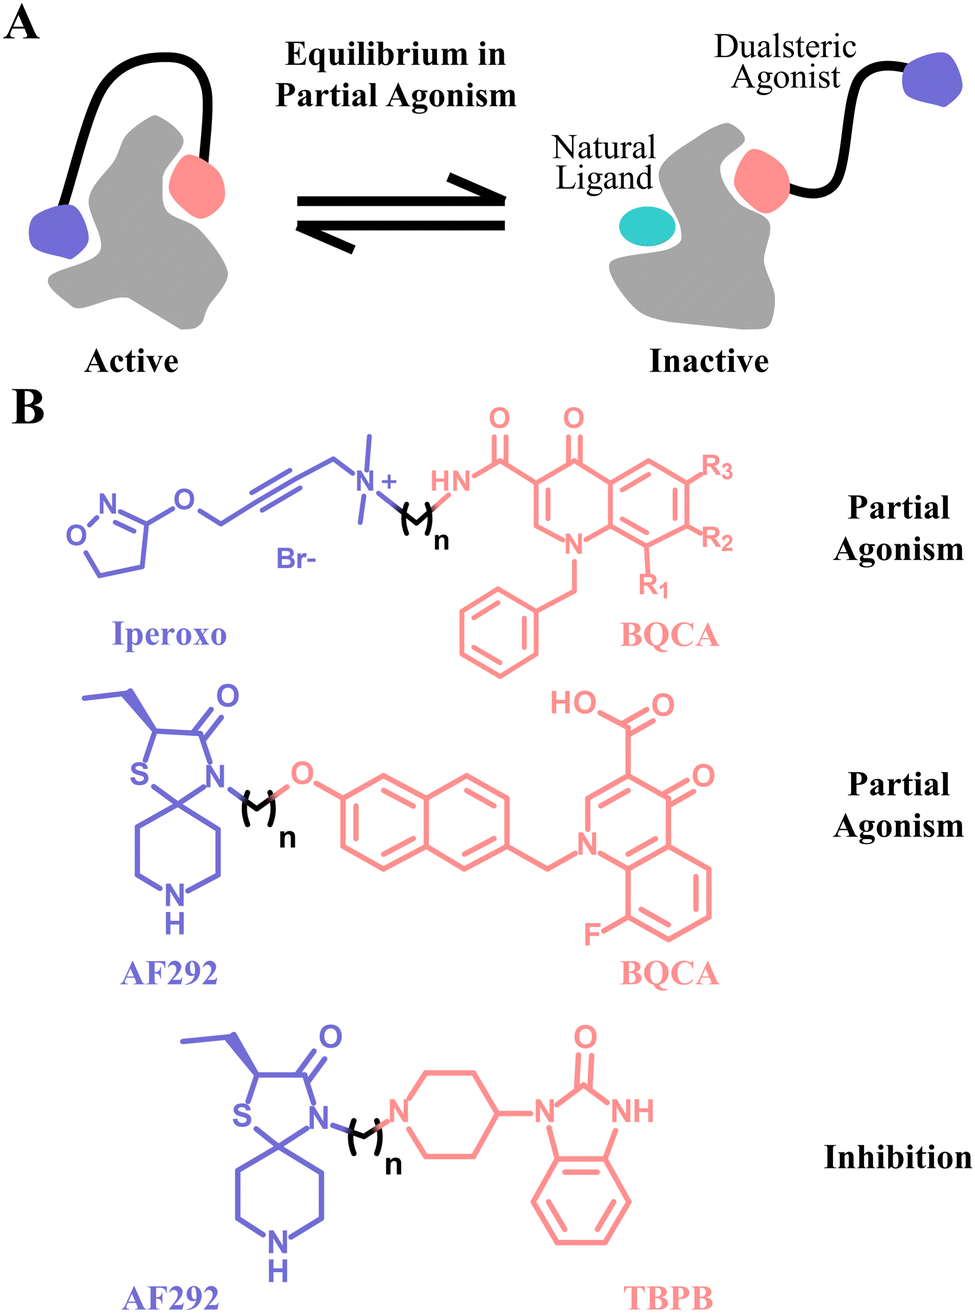 Designing drugs and chemical probes with the dualsteric approach - Chemical  Society Reviews (RSC Publishing) DOI:10.1039/D3CS00650F